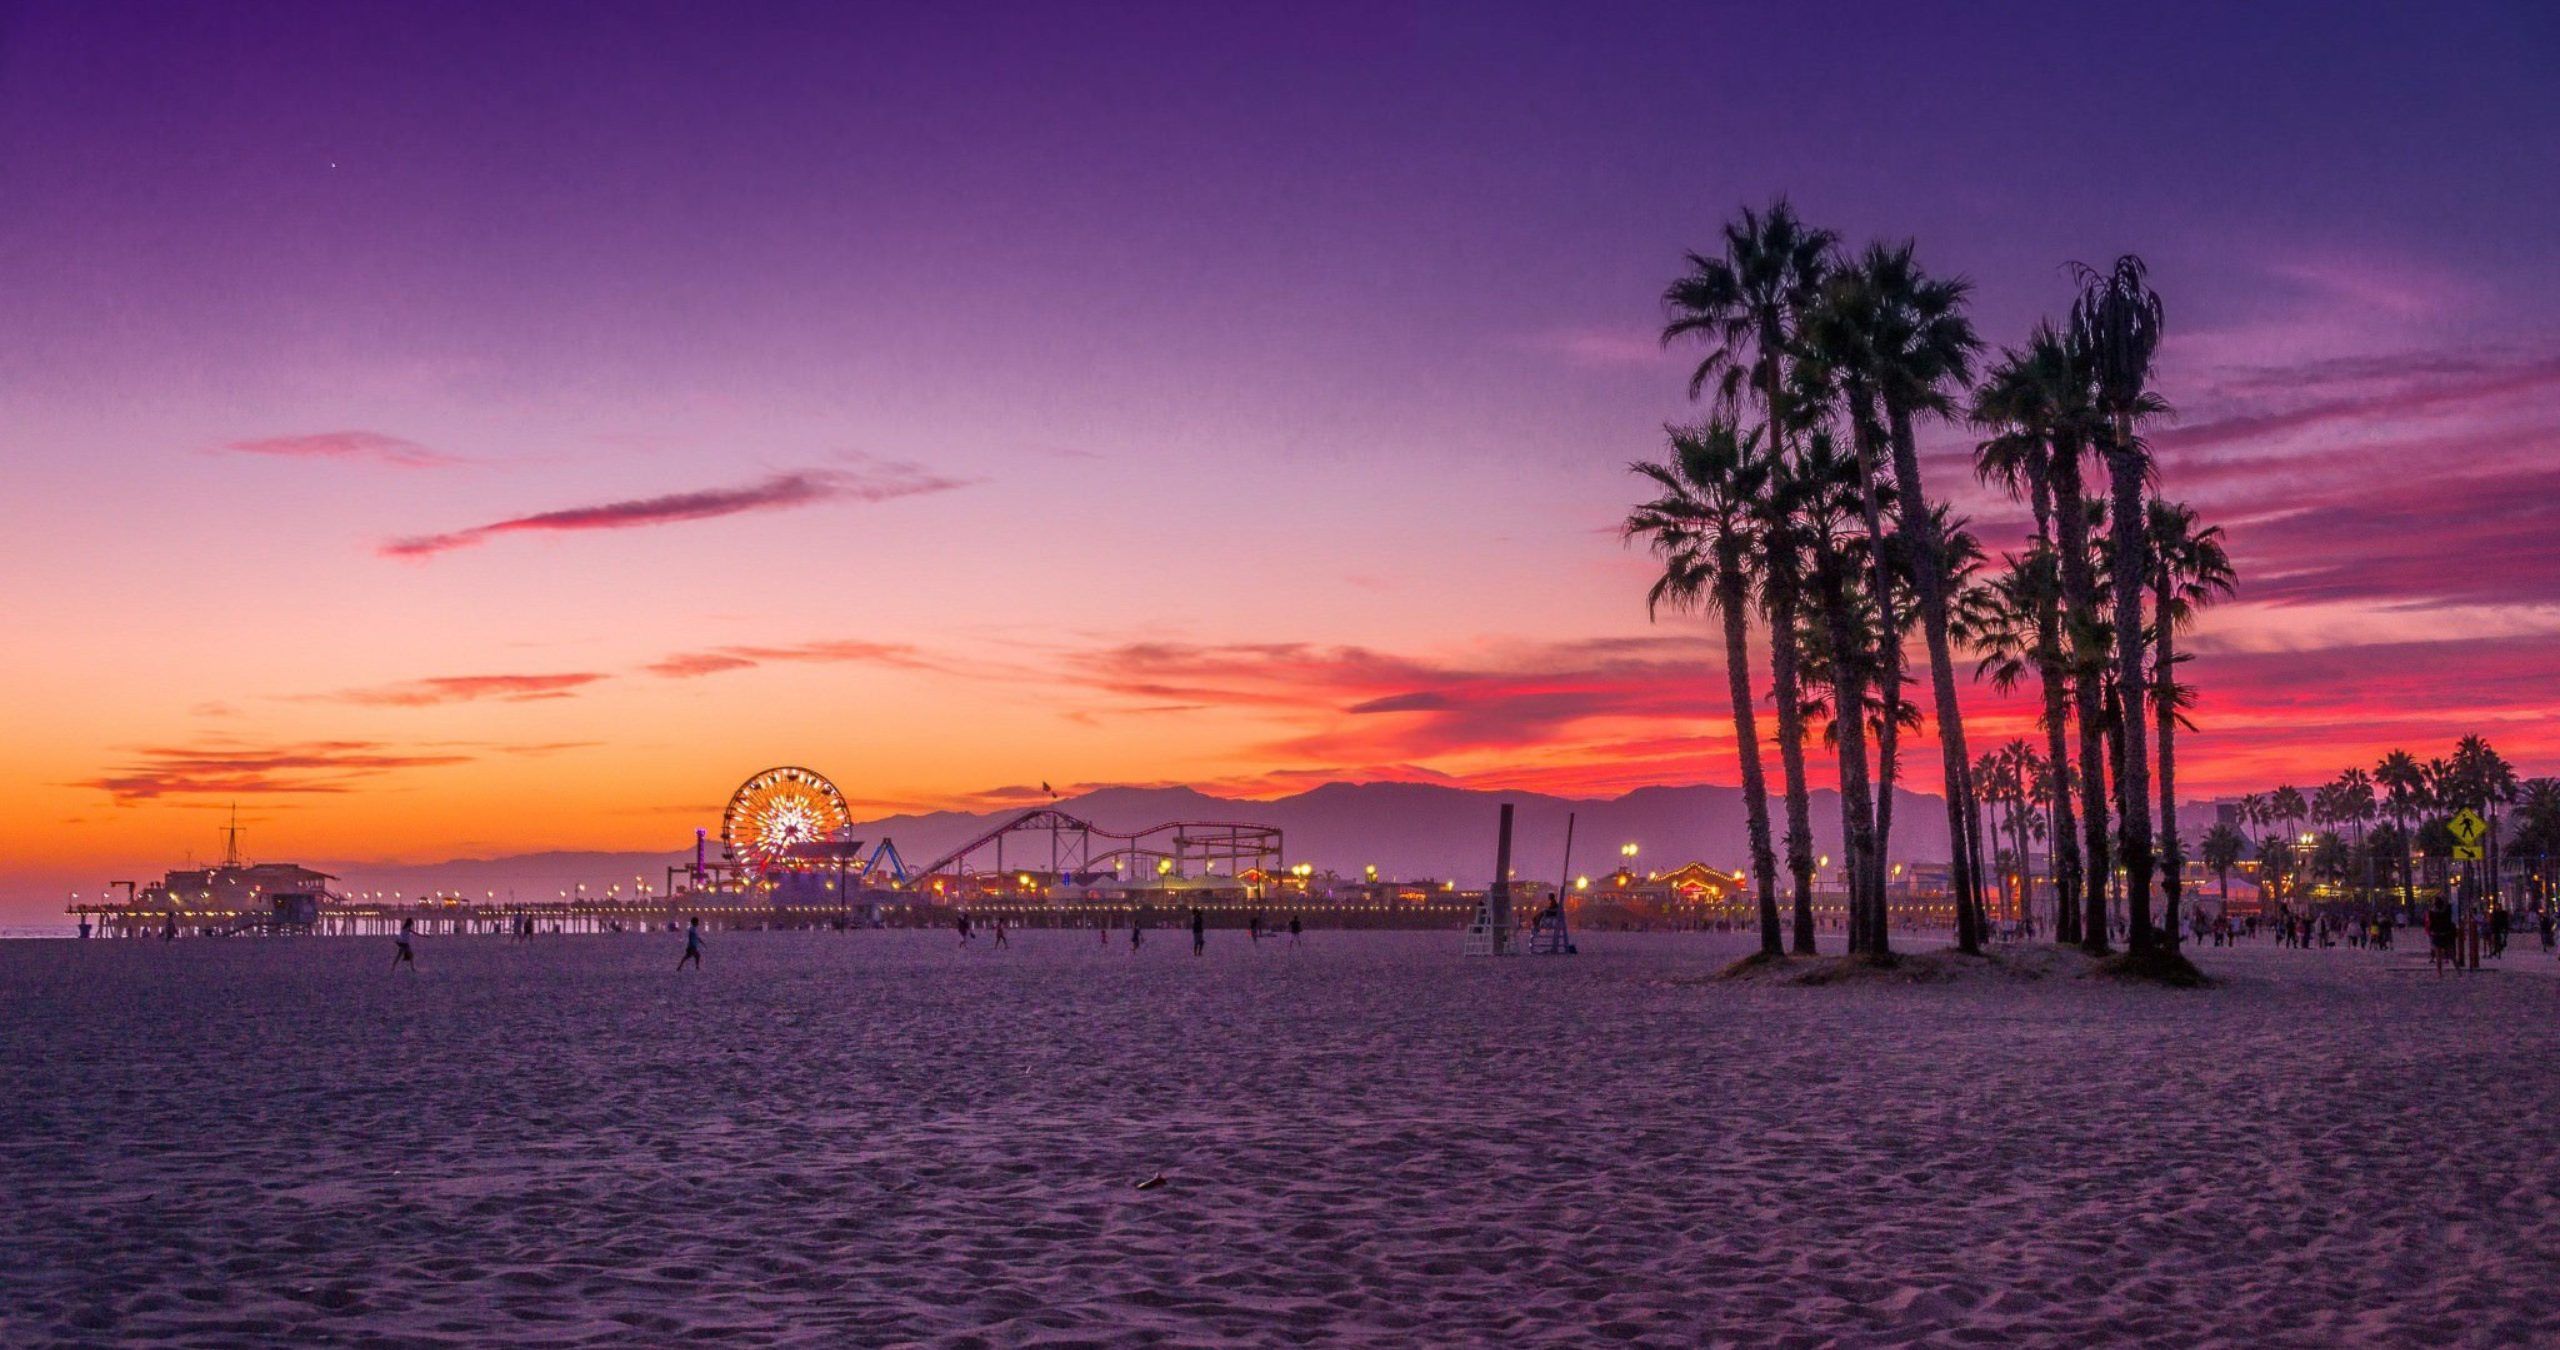 A beautiful sunset at the beach with palm trees and a ferris wheel in the distance. - Los Angeles, California